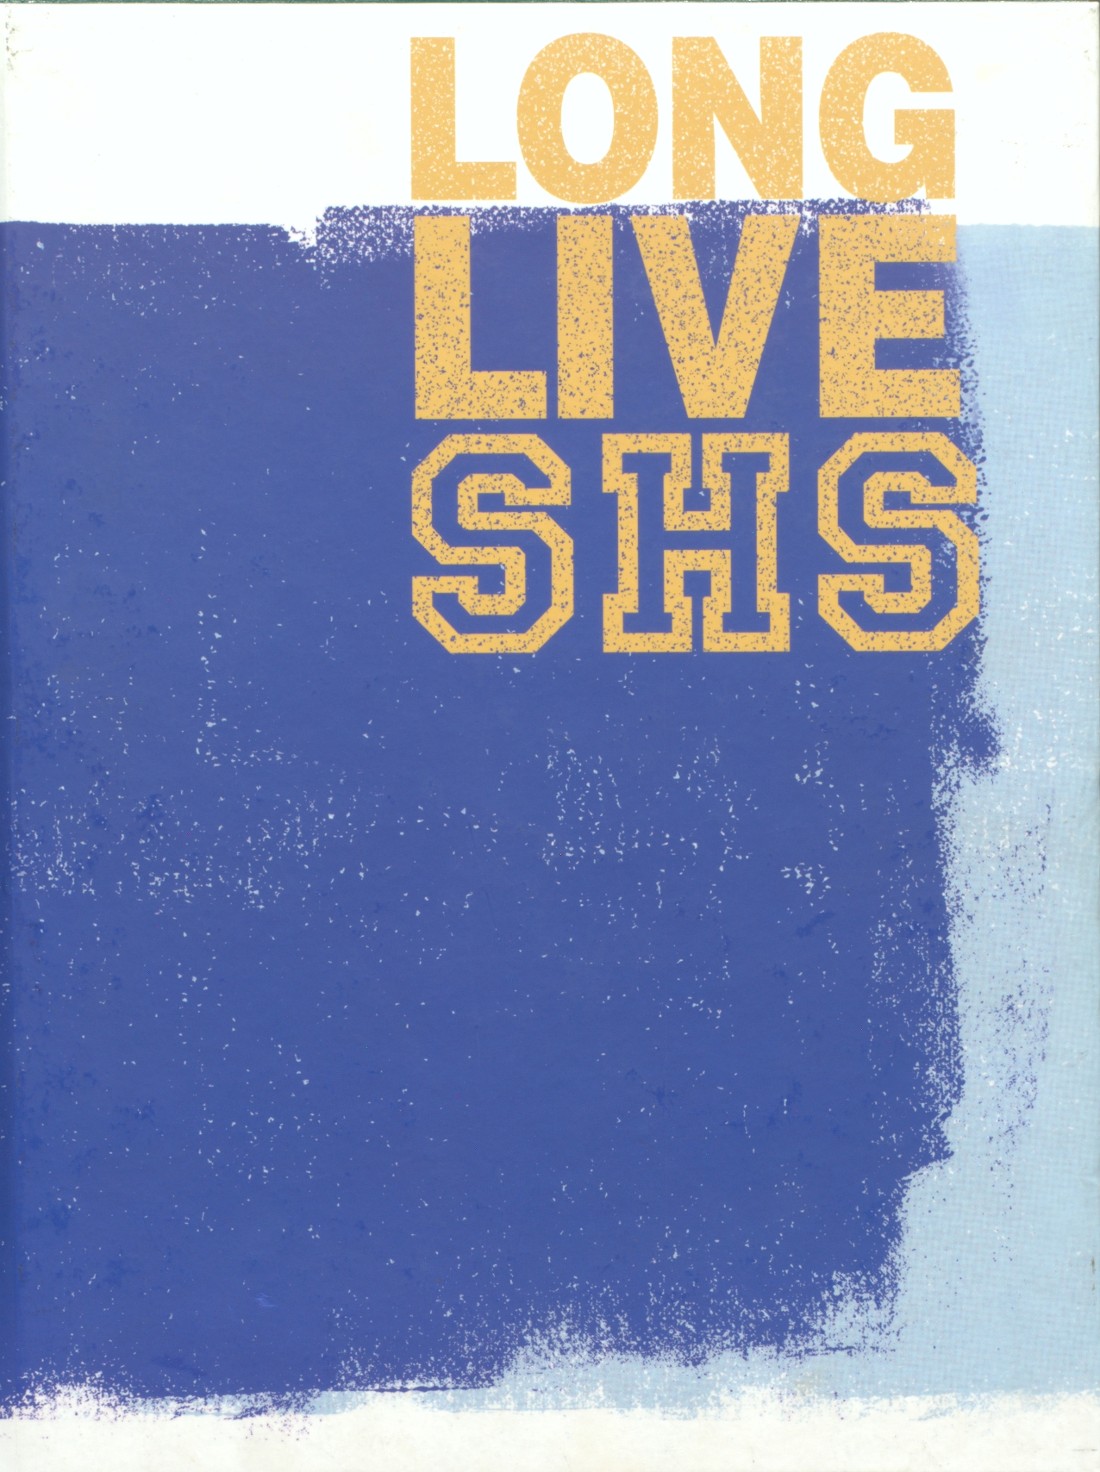 2013 yearbook from Streamwood High School from Streamwood, Illinois for ...